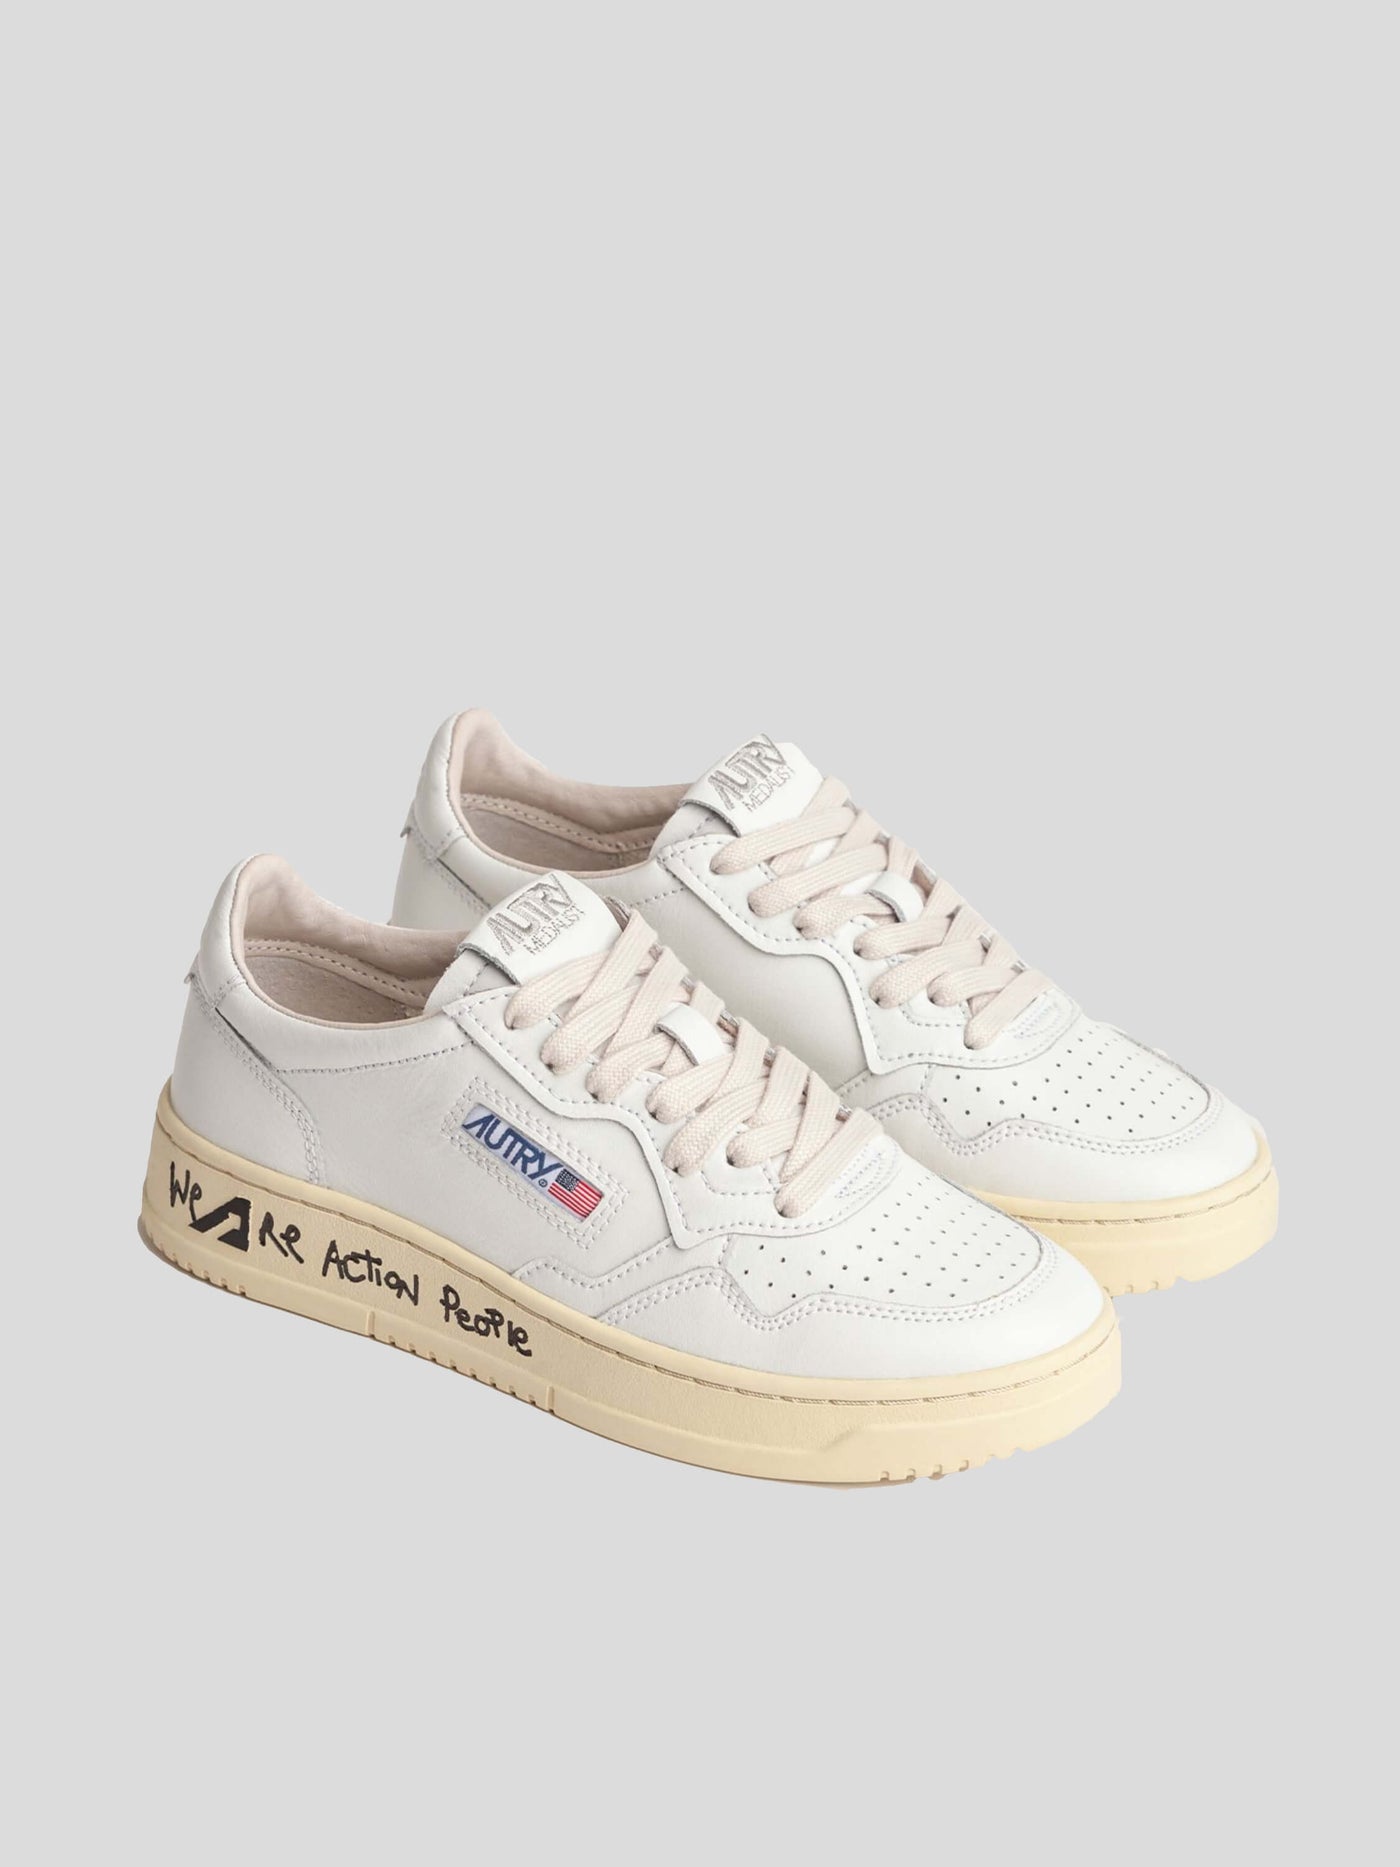 Autry Sneaker | Medalist Action People weiß AULM LD06 | AULM LD06 white / ADAM/EVE